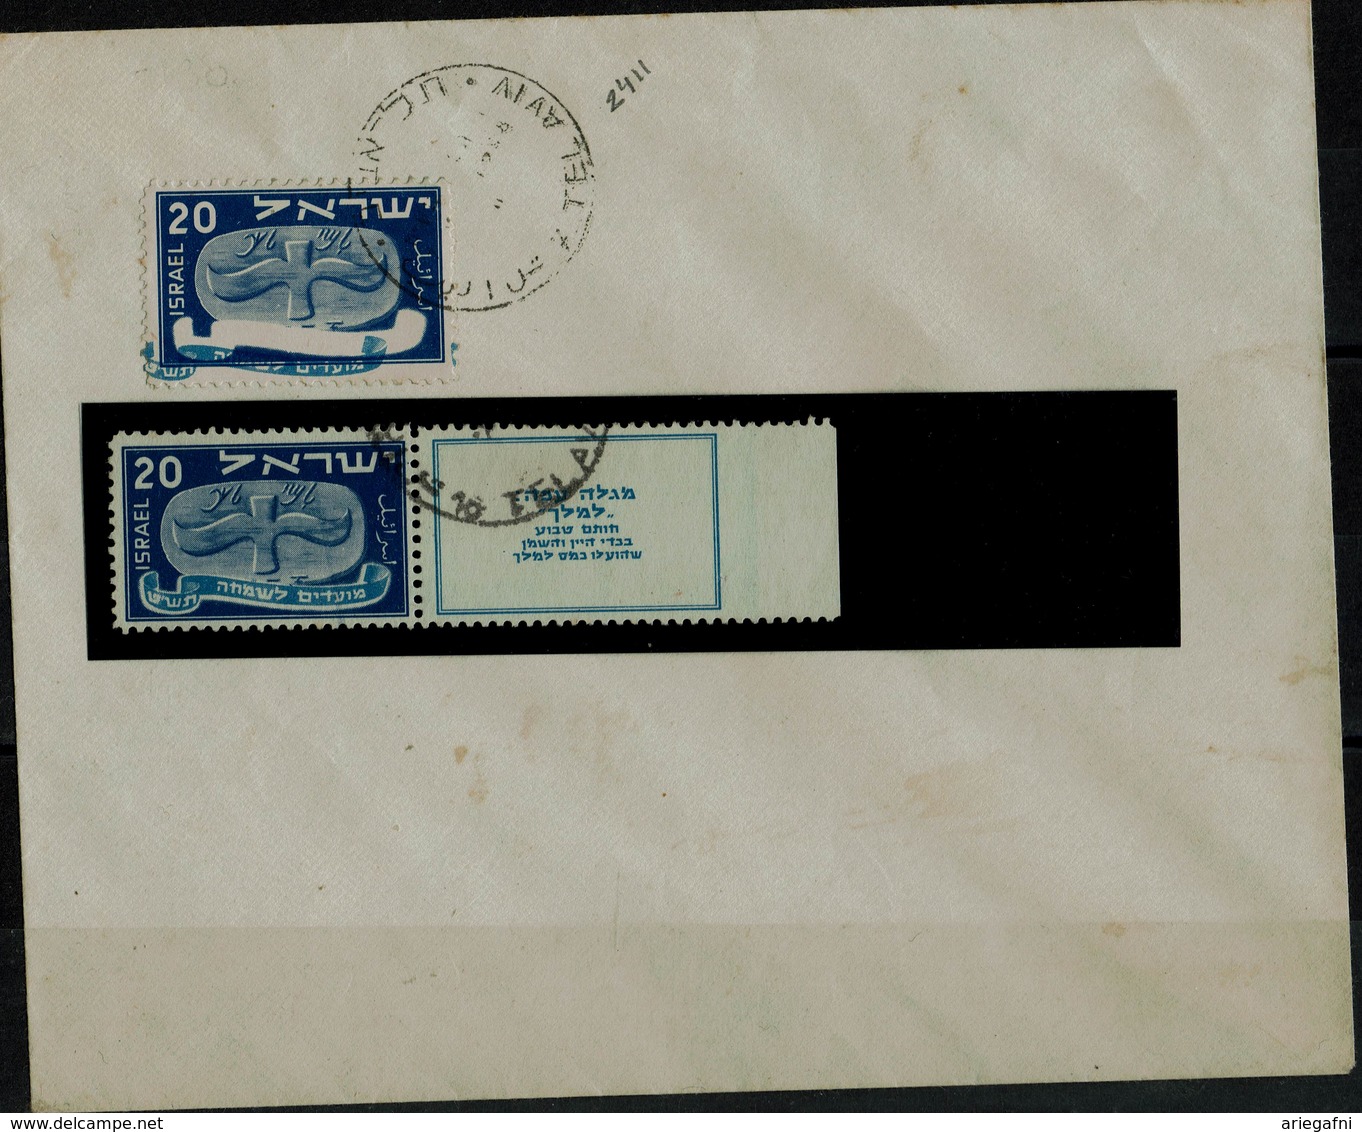 ISRAEL 1948 COVER WITH STAMP 20pr NEW YEAR ERROR MISSING COLOUR VF!! - Imperforates, Proofs & Errors